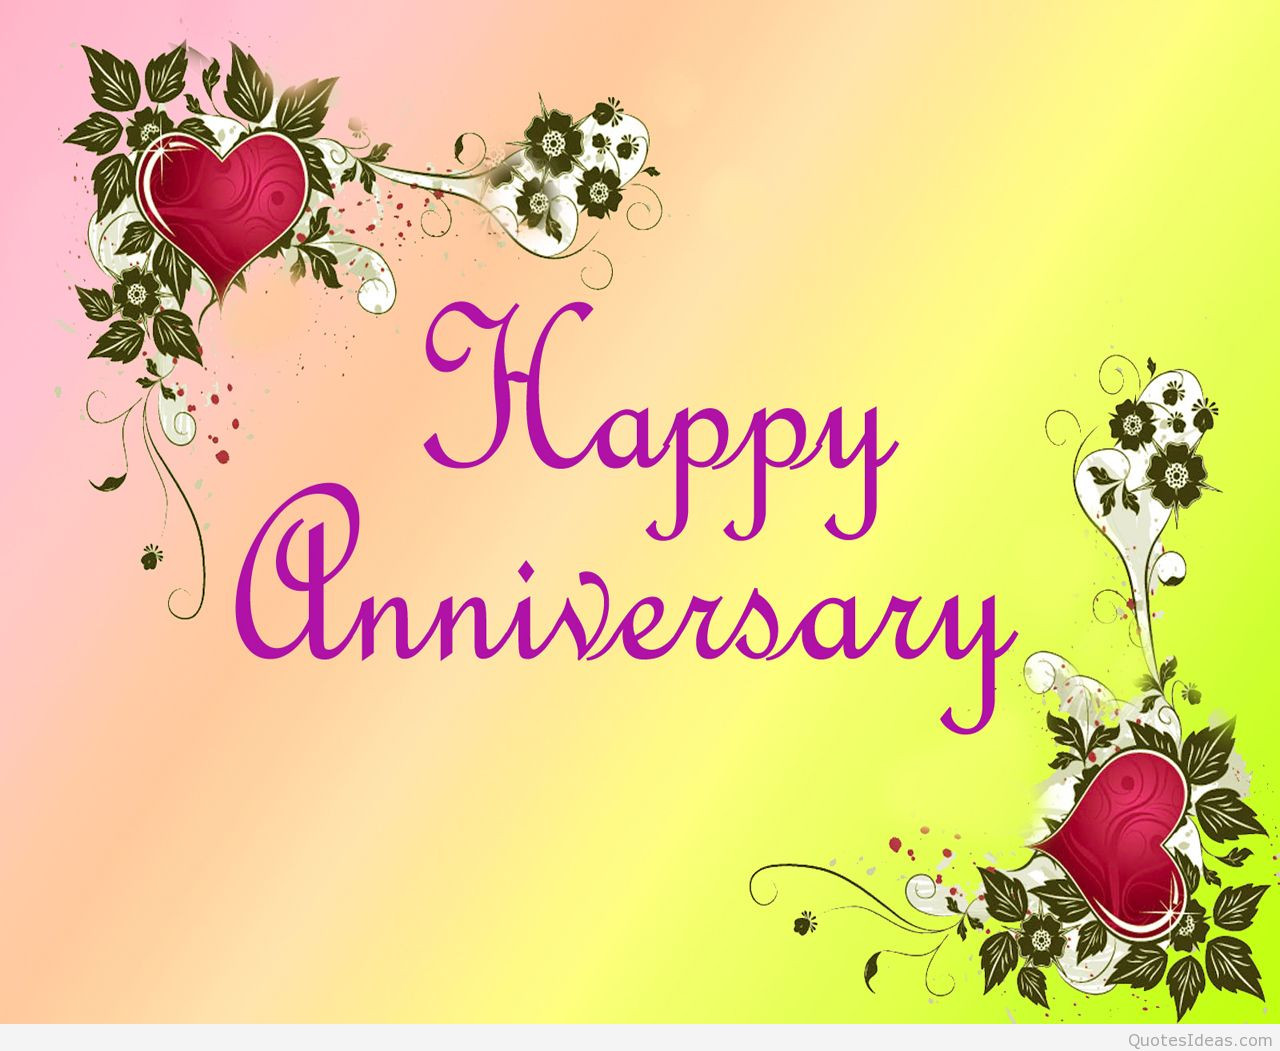 Anniversary Images And Quotes
 Happy anniversary wishes quotes messages on wallpapers